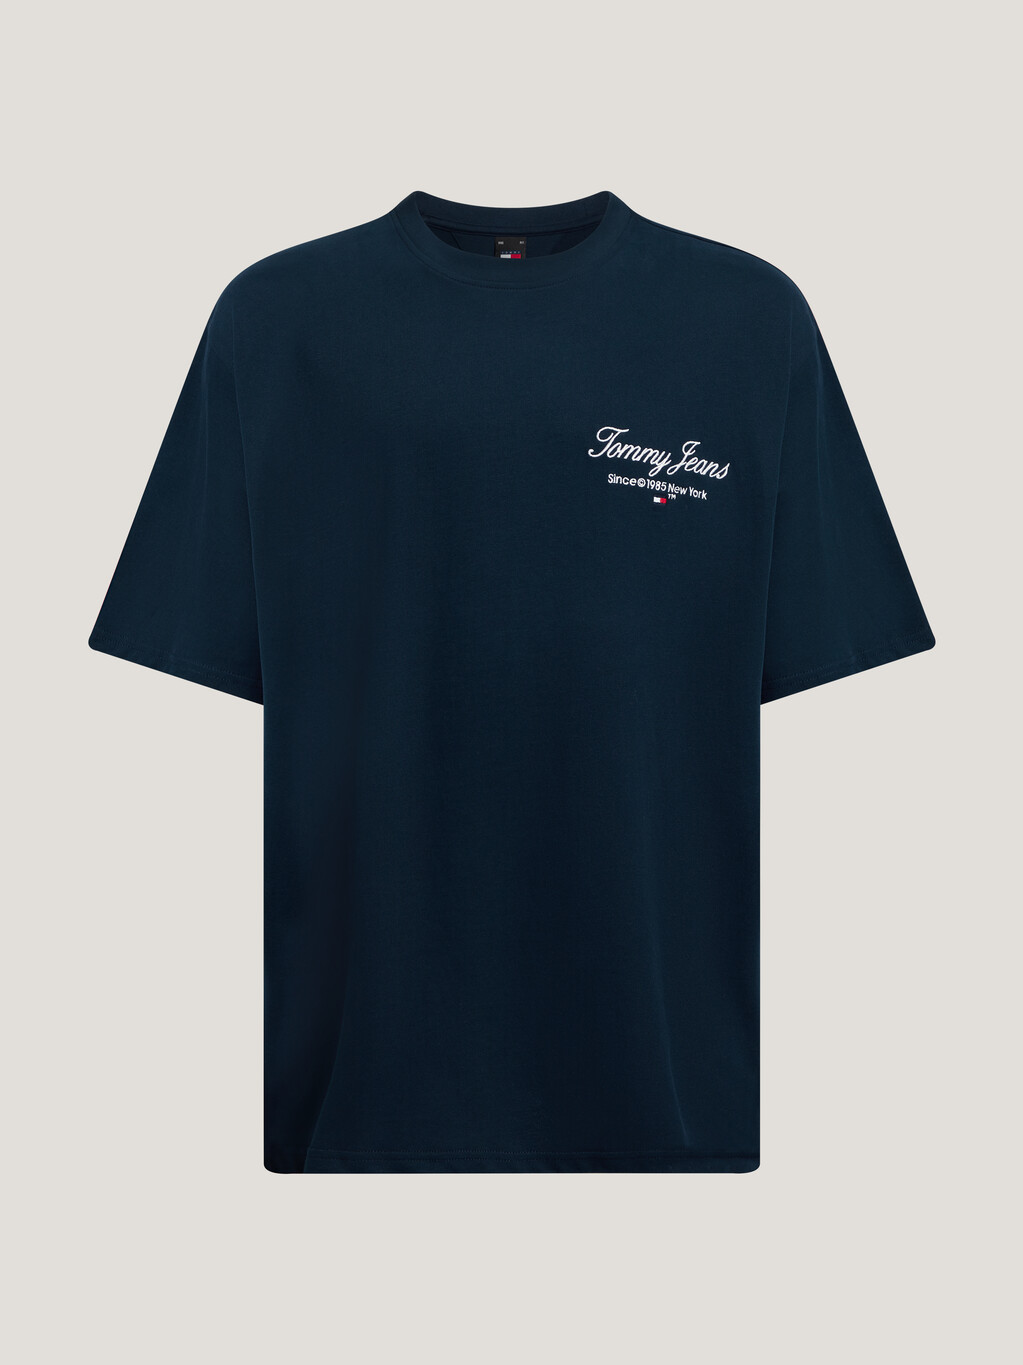 Logo Embroidery Relaxed Fit T-Shirt, Dark Night Navy, hi-res